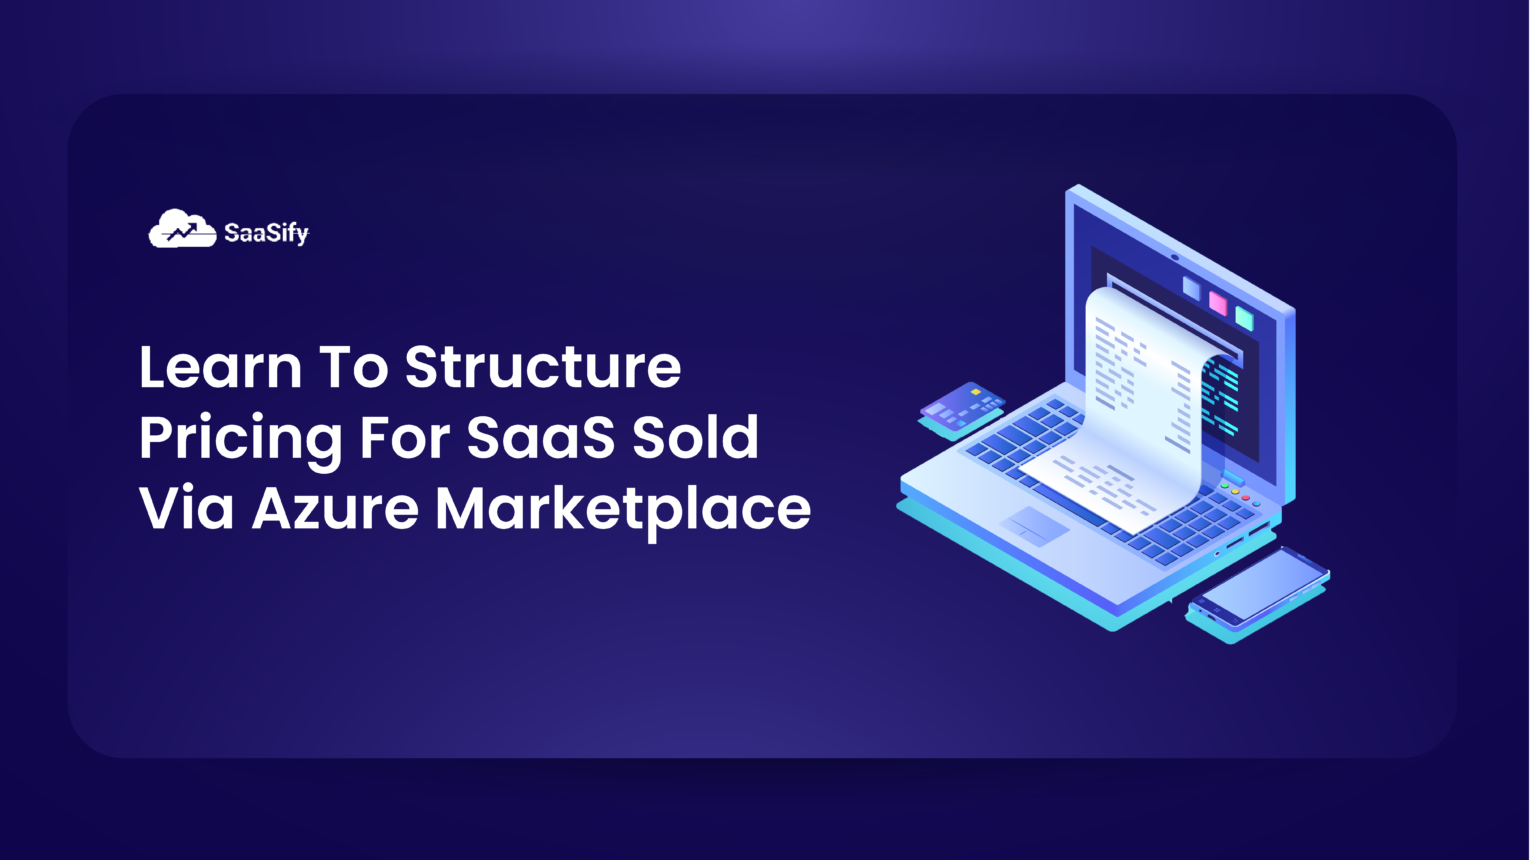 7 Best Practices To Structure Pricing For SaaS Sold Via Azure Marketplace